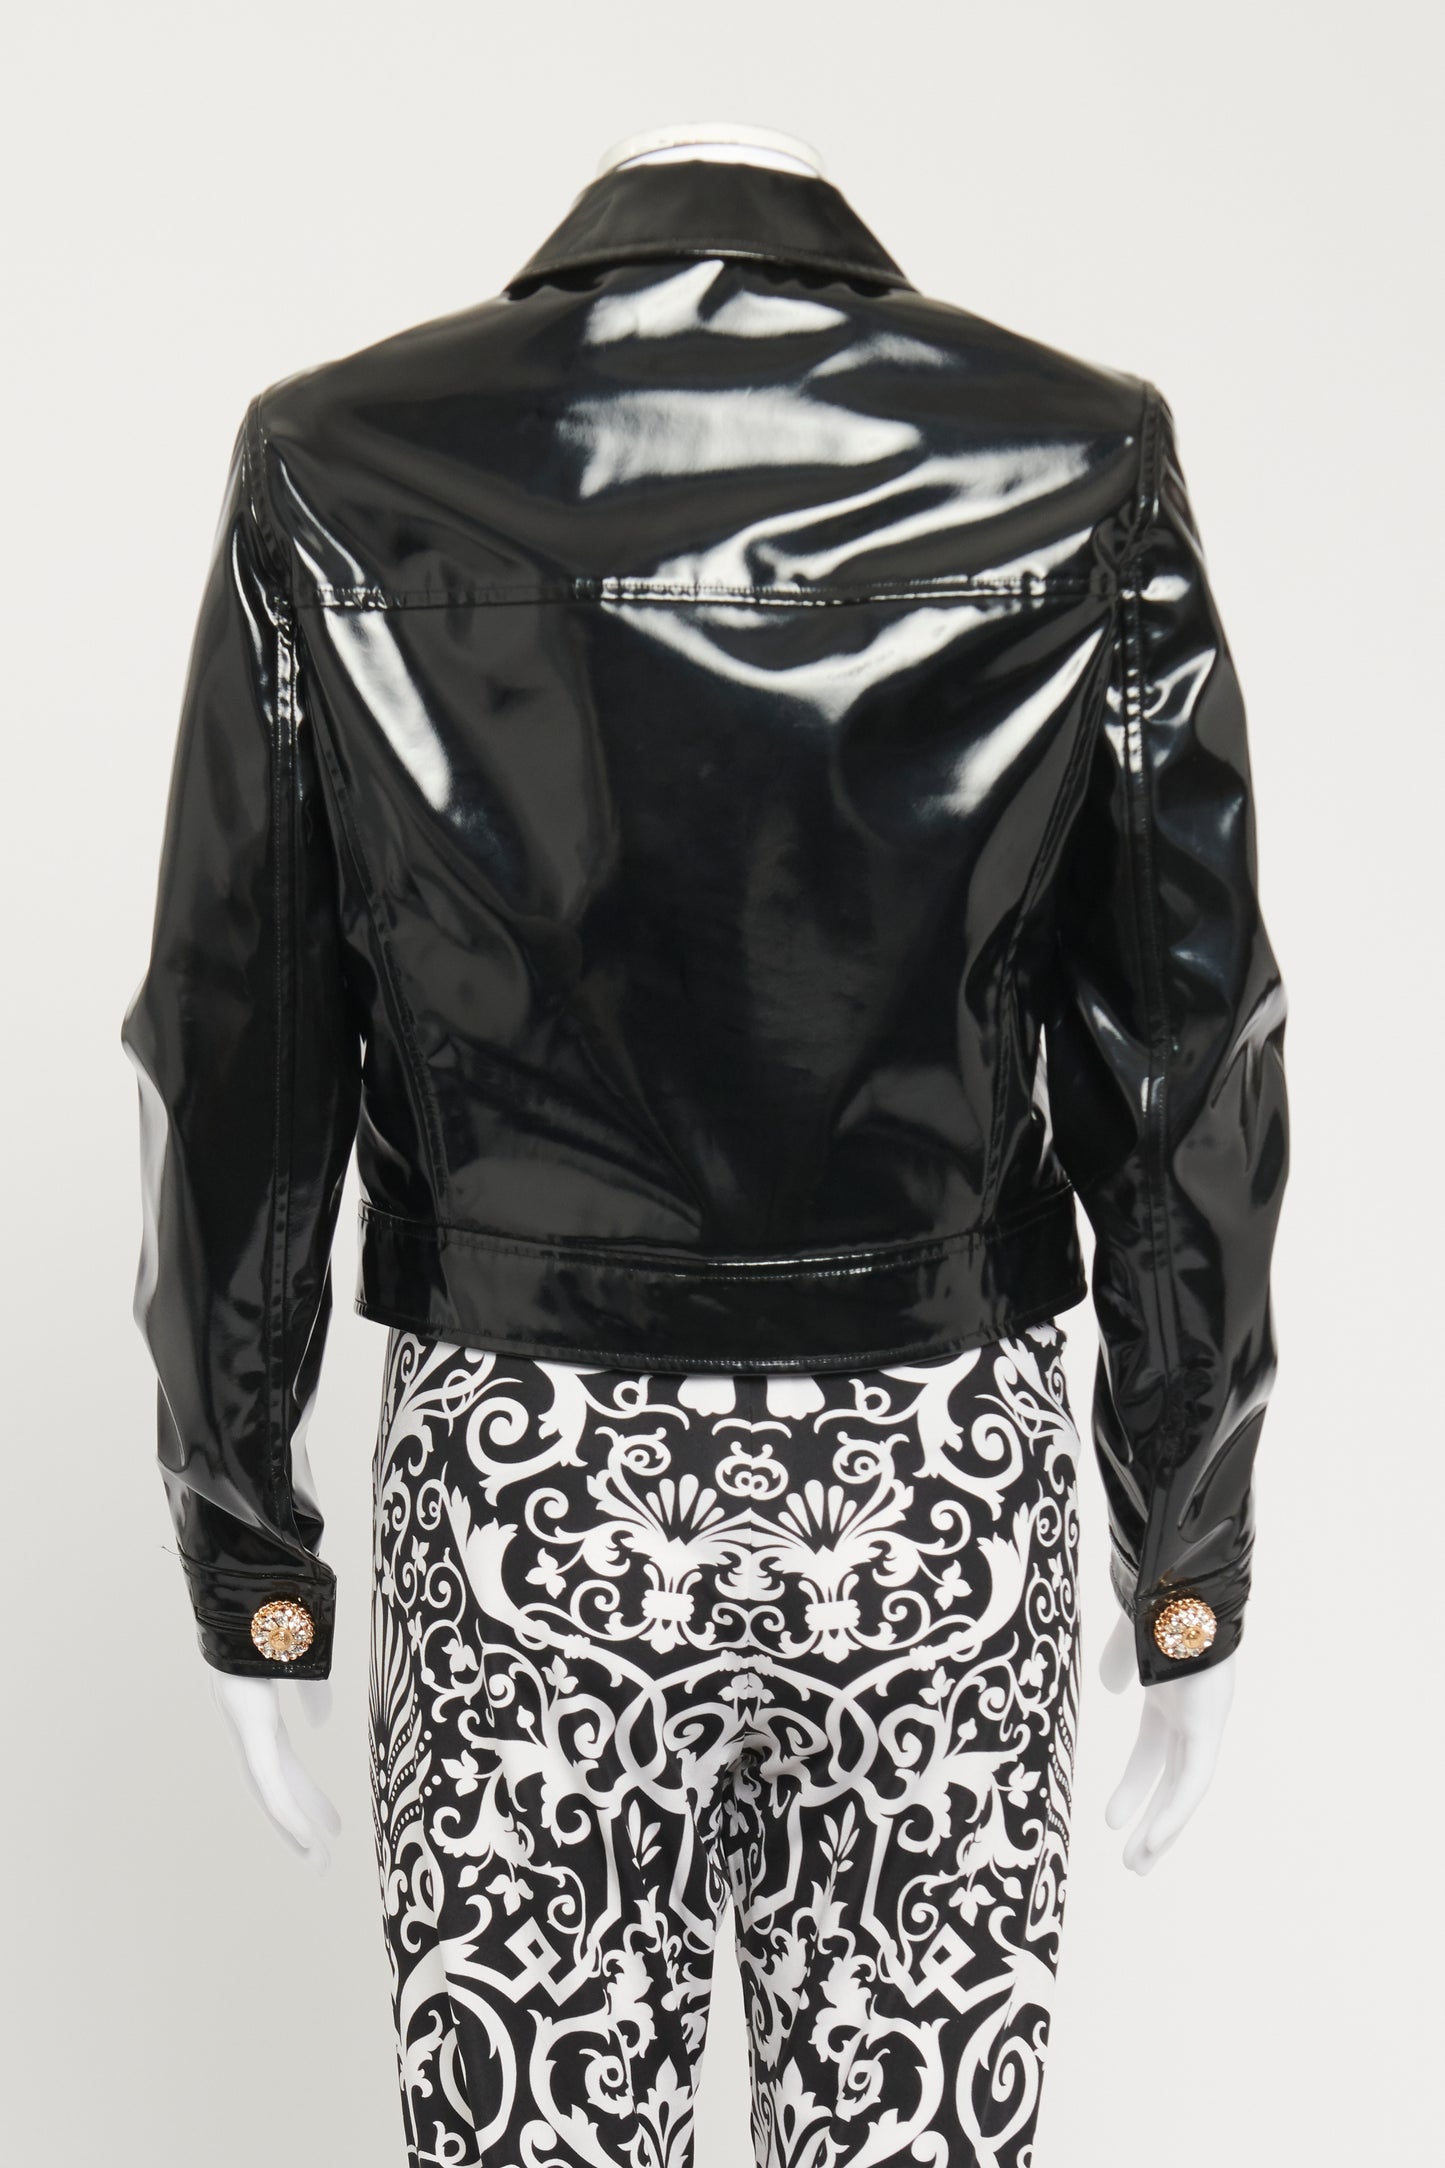 Black Shiny Preowned Jacket With Jewel Buttons